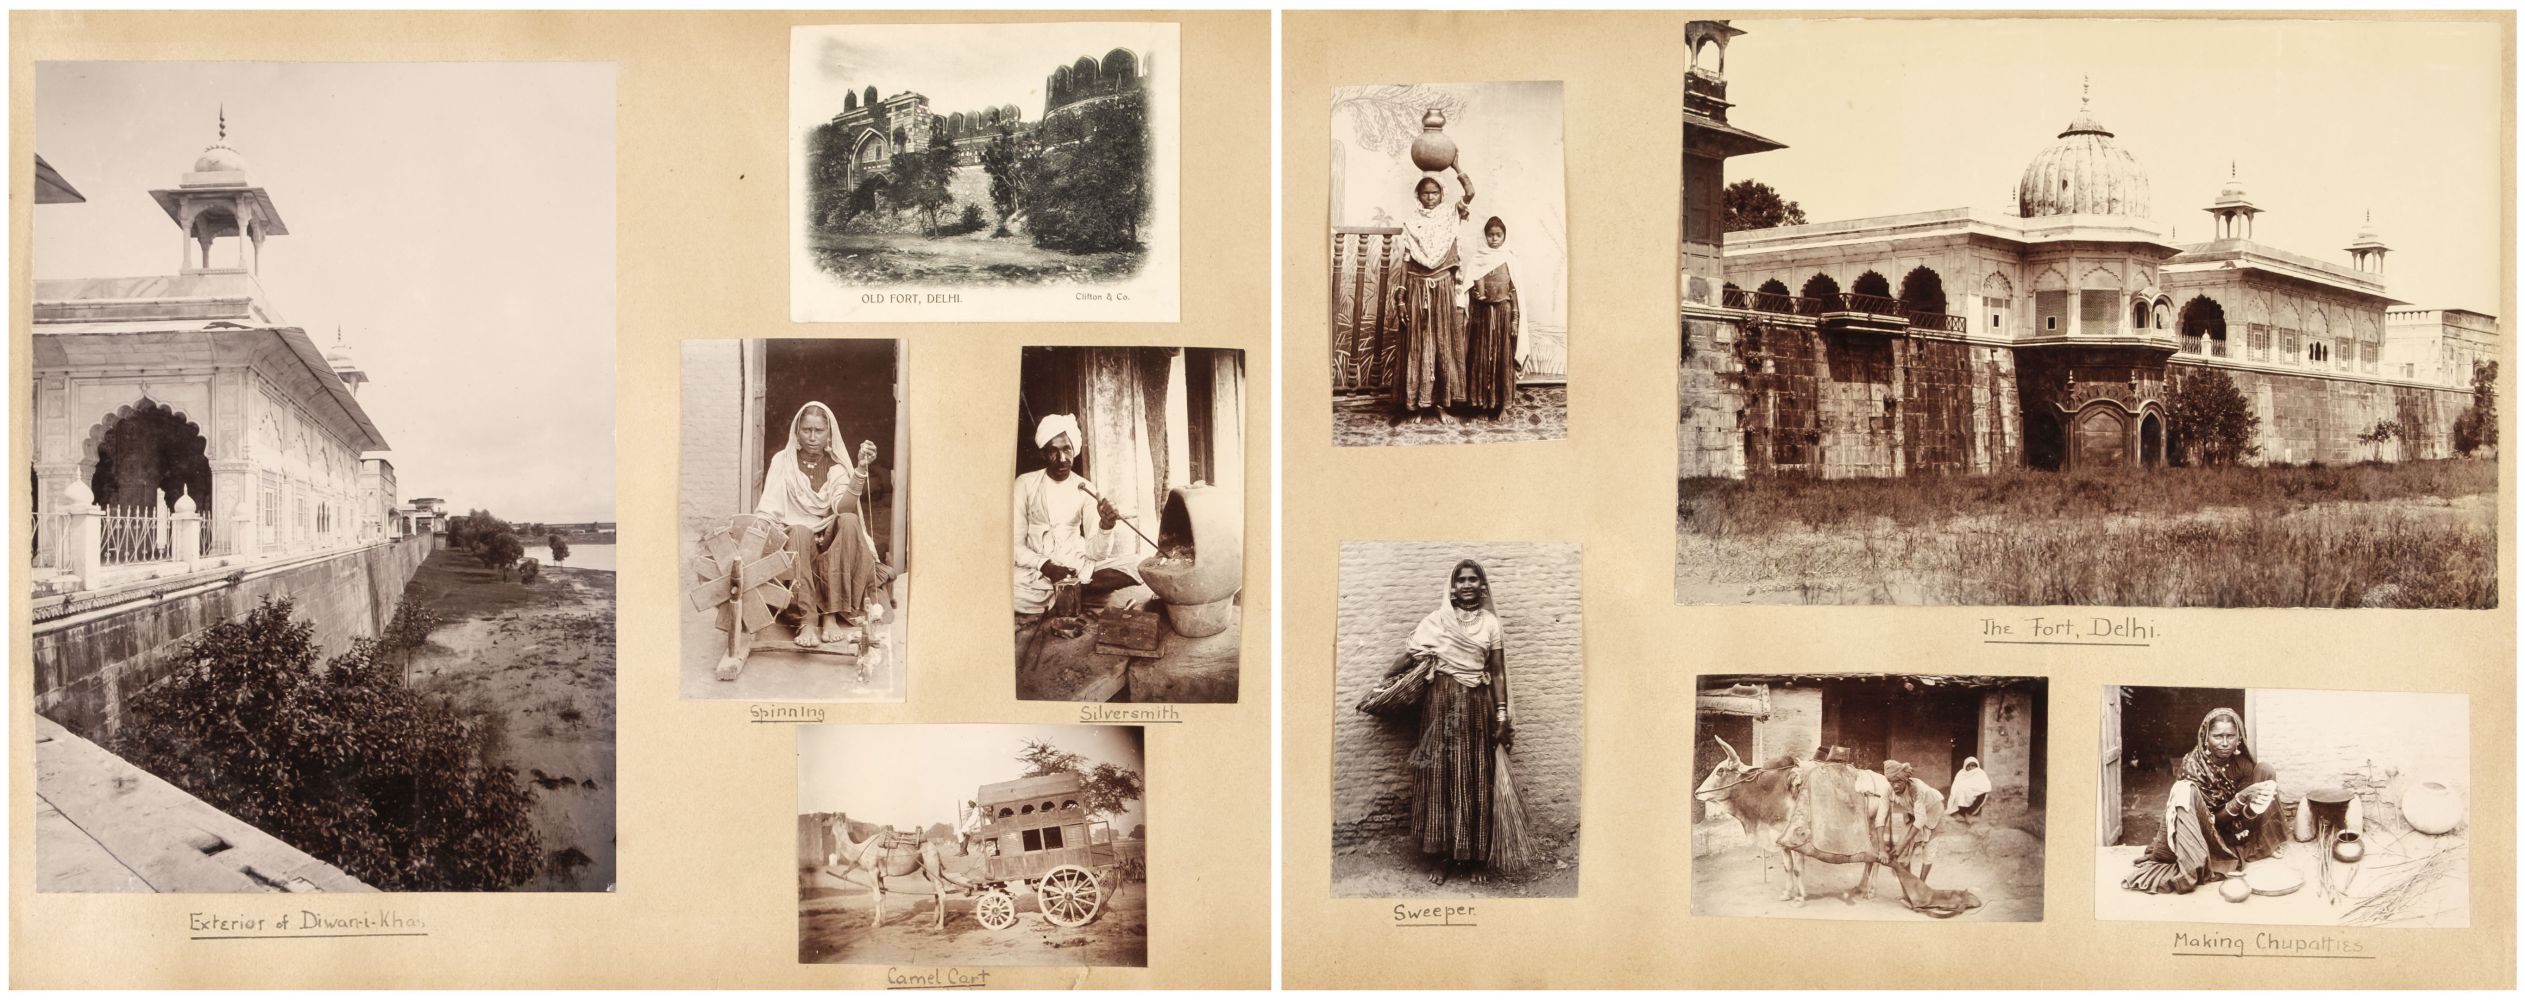 The Delhi Durbar of 1903. A travel album compiled by a Miss Bruce, November 1902-03